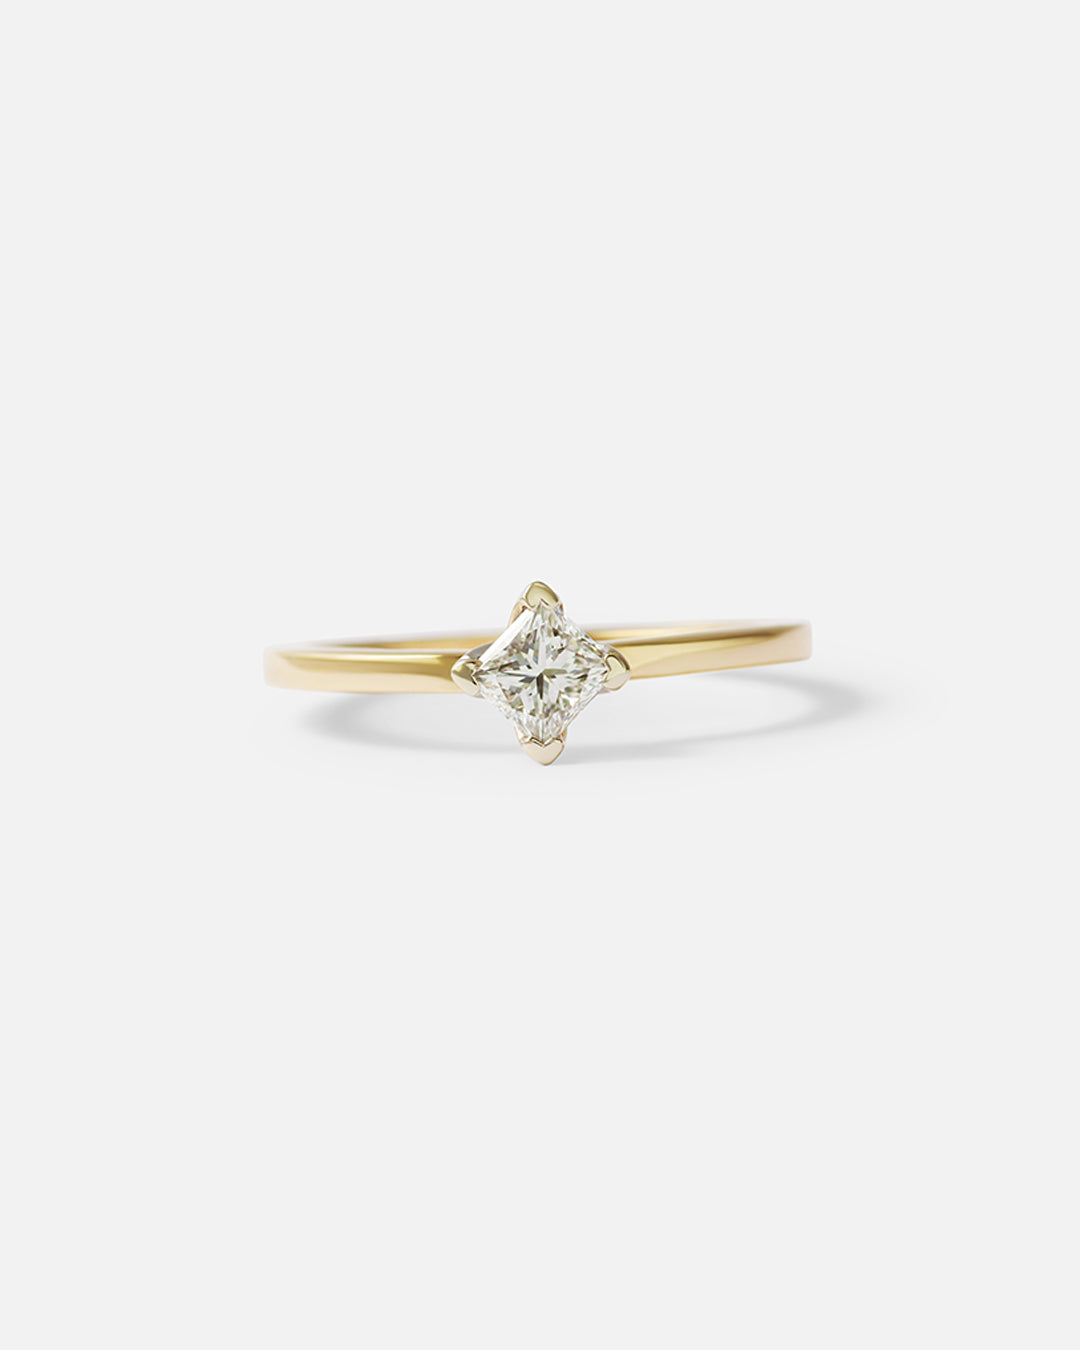 Solitaire Ring / Princess Cut Diamond By Nishi in Engagement Rings Category